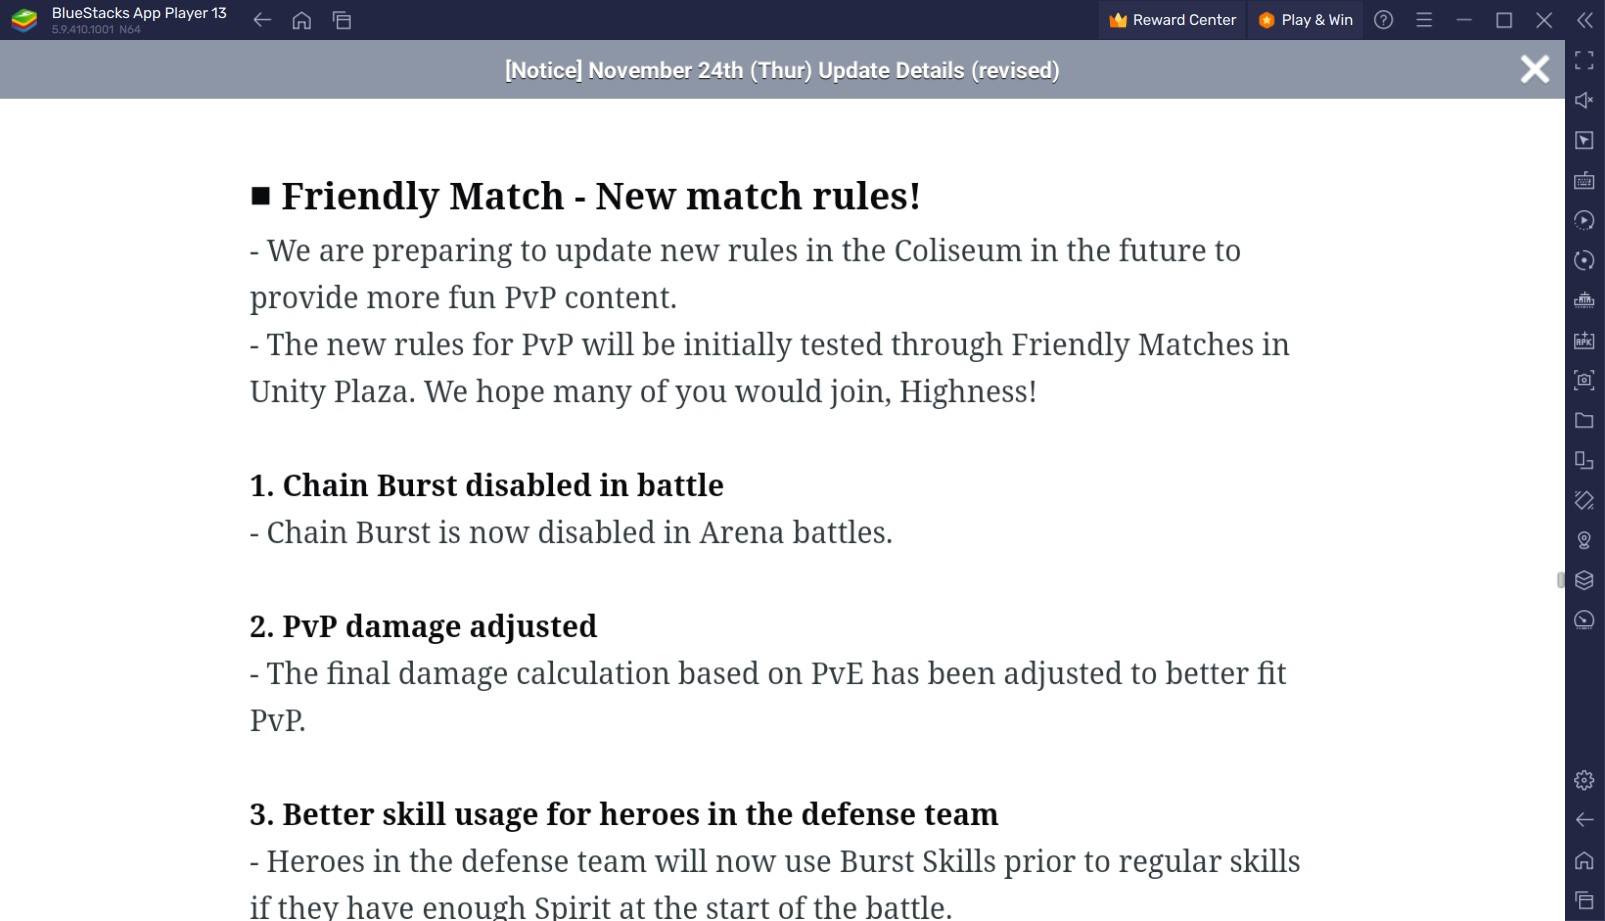 Lord of Heroes – New Hero Light Laphlaes, Calamity Cradles, and Friendly Match Mode Improvements